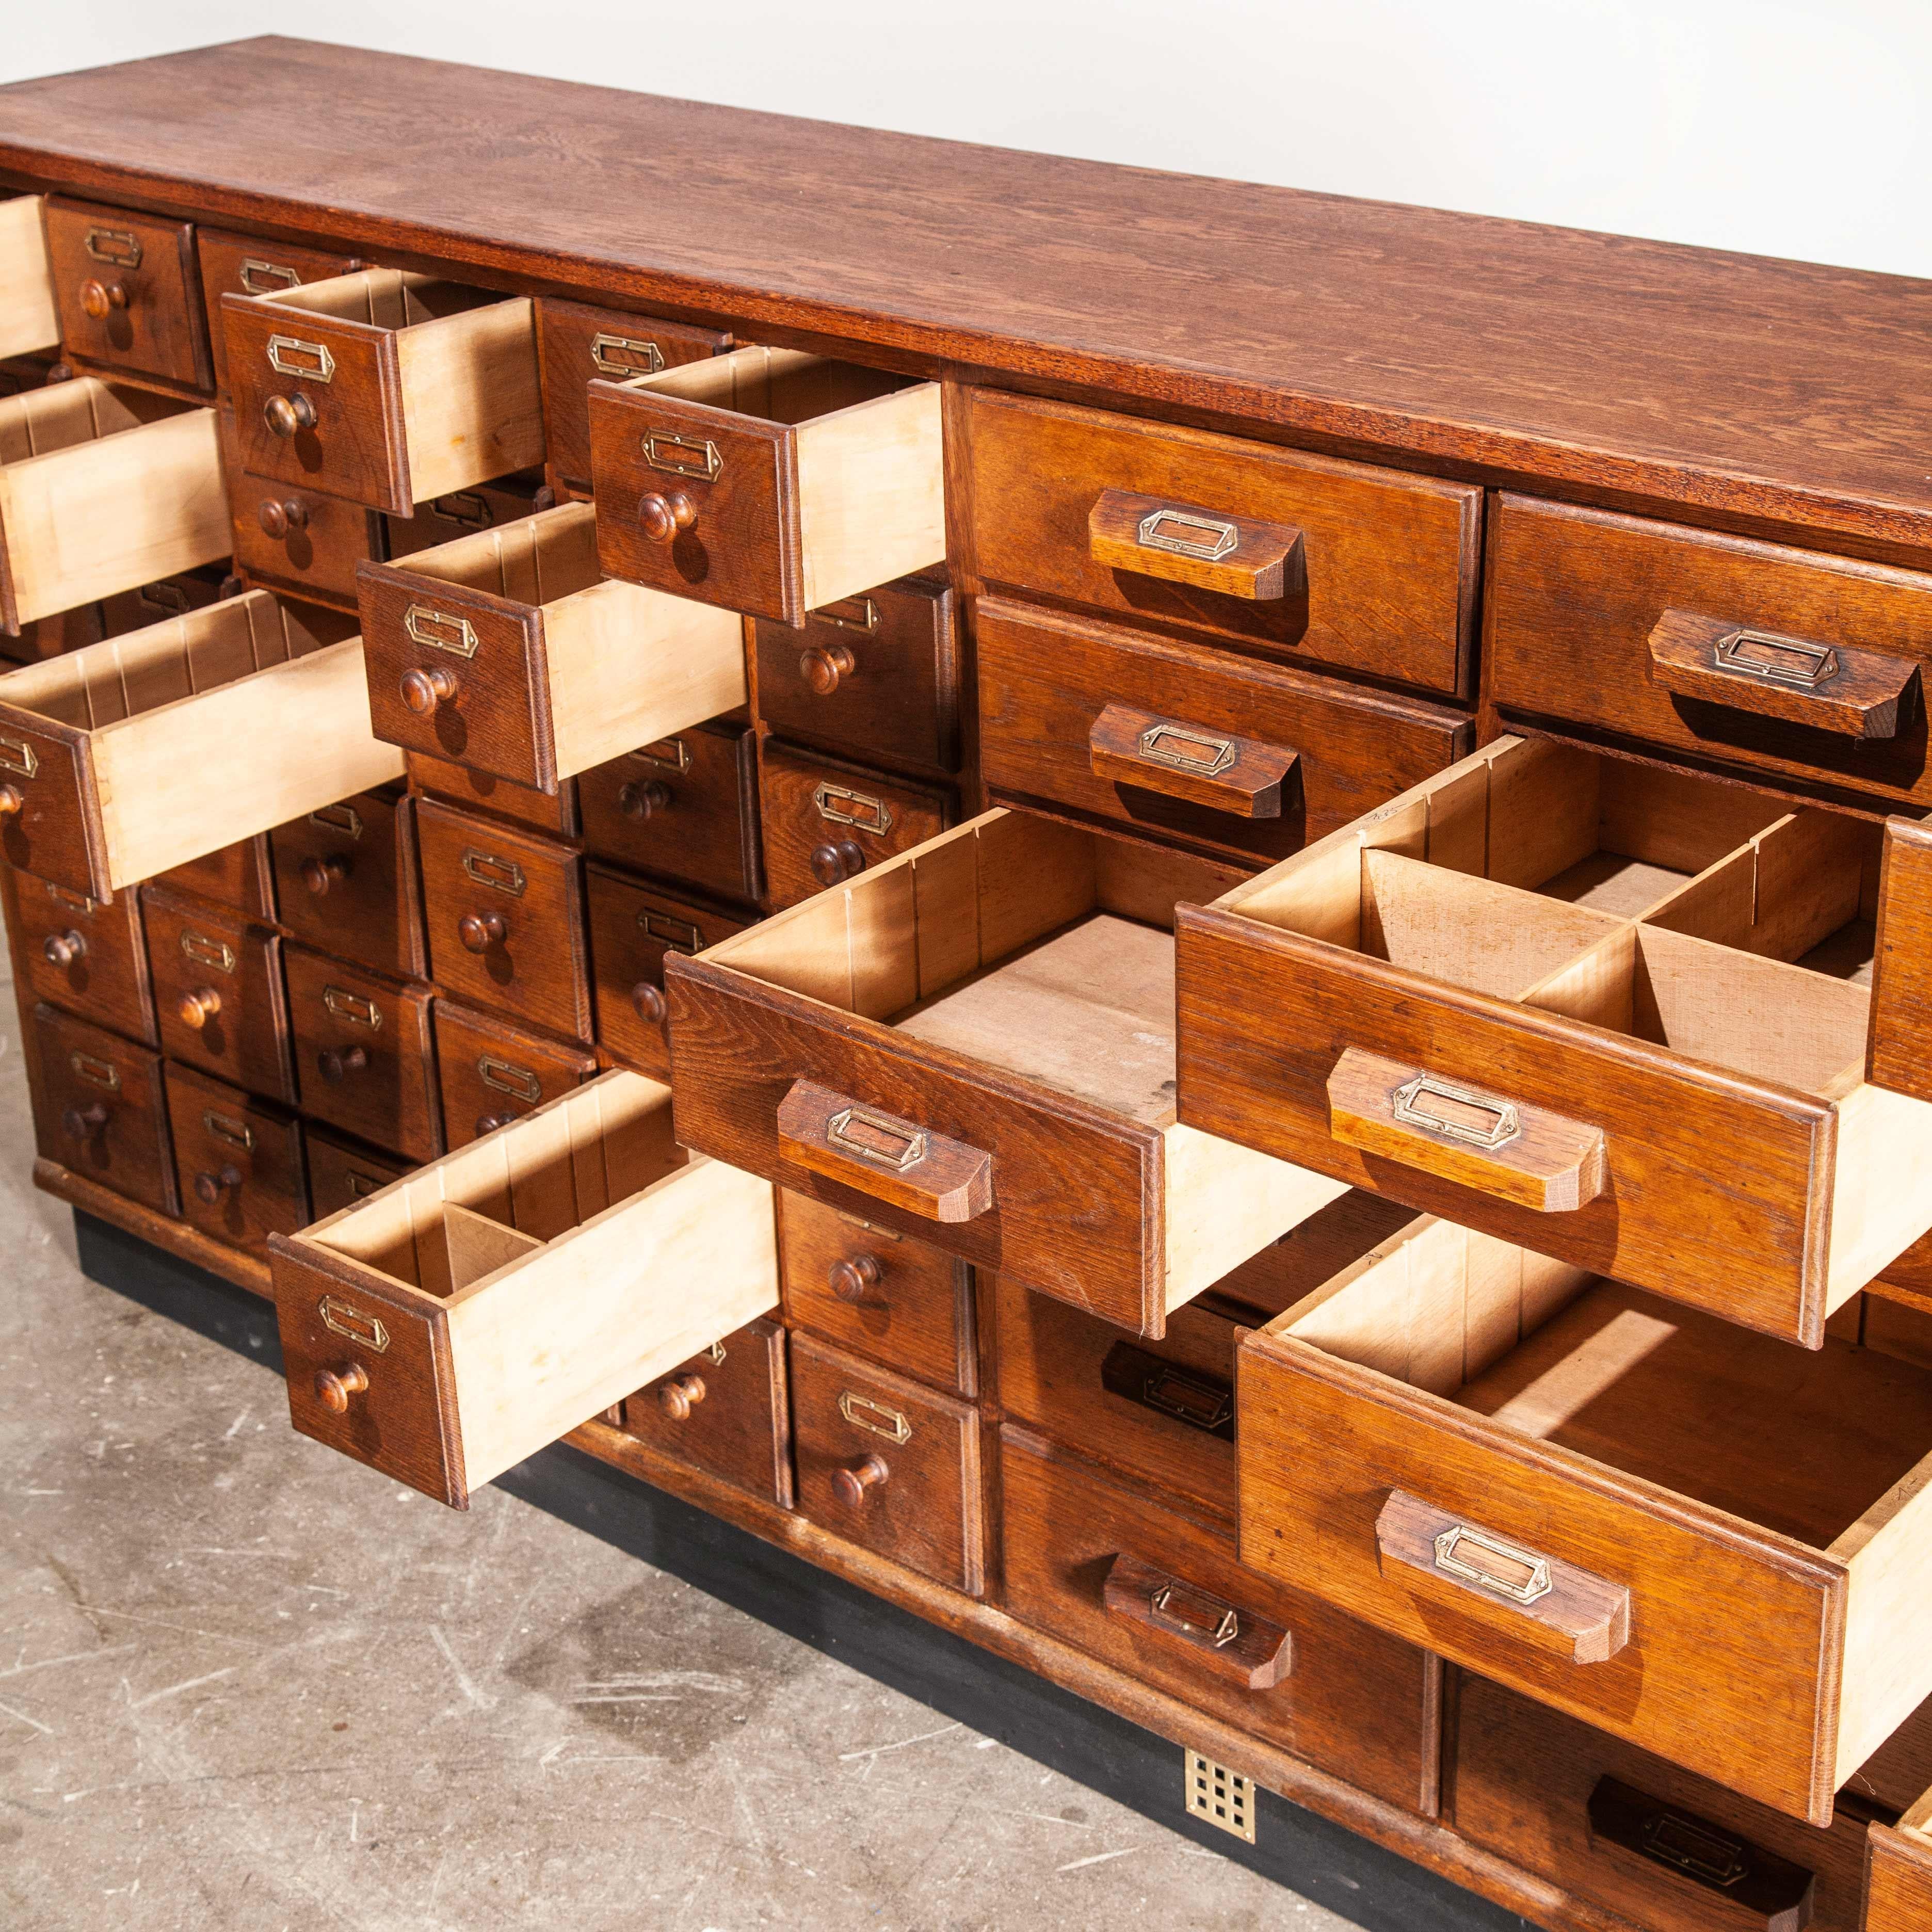 1950s oak apothecary multi drawer chest of drawers, fifty four drawers
1950s oak apothecary multi drawer chest of drawers, fifty four drawers. The chest of drawers has a paneled back, and boasts interchangeable dividers in some of the drawers. The